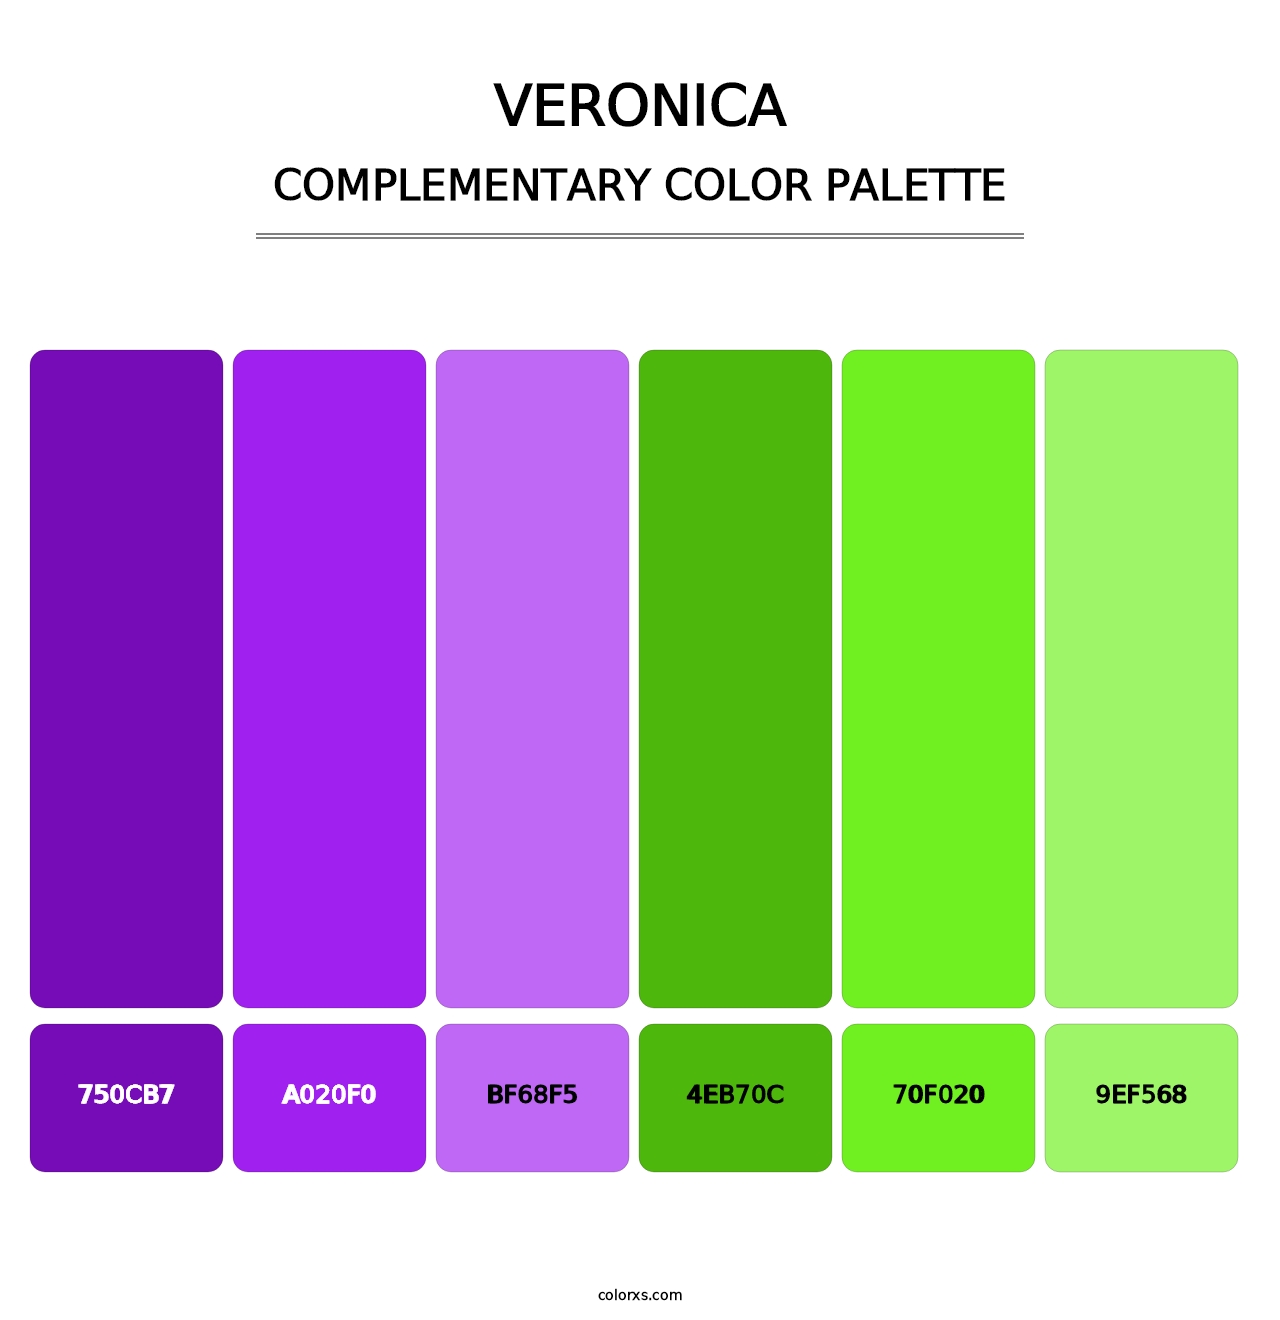 Veronica - Complementary Color Palette